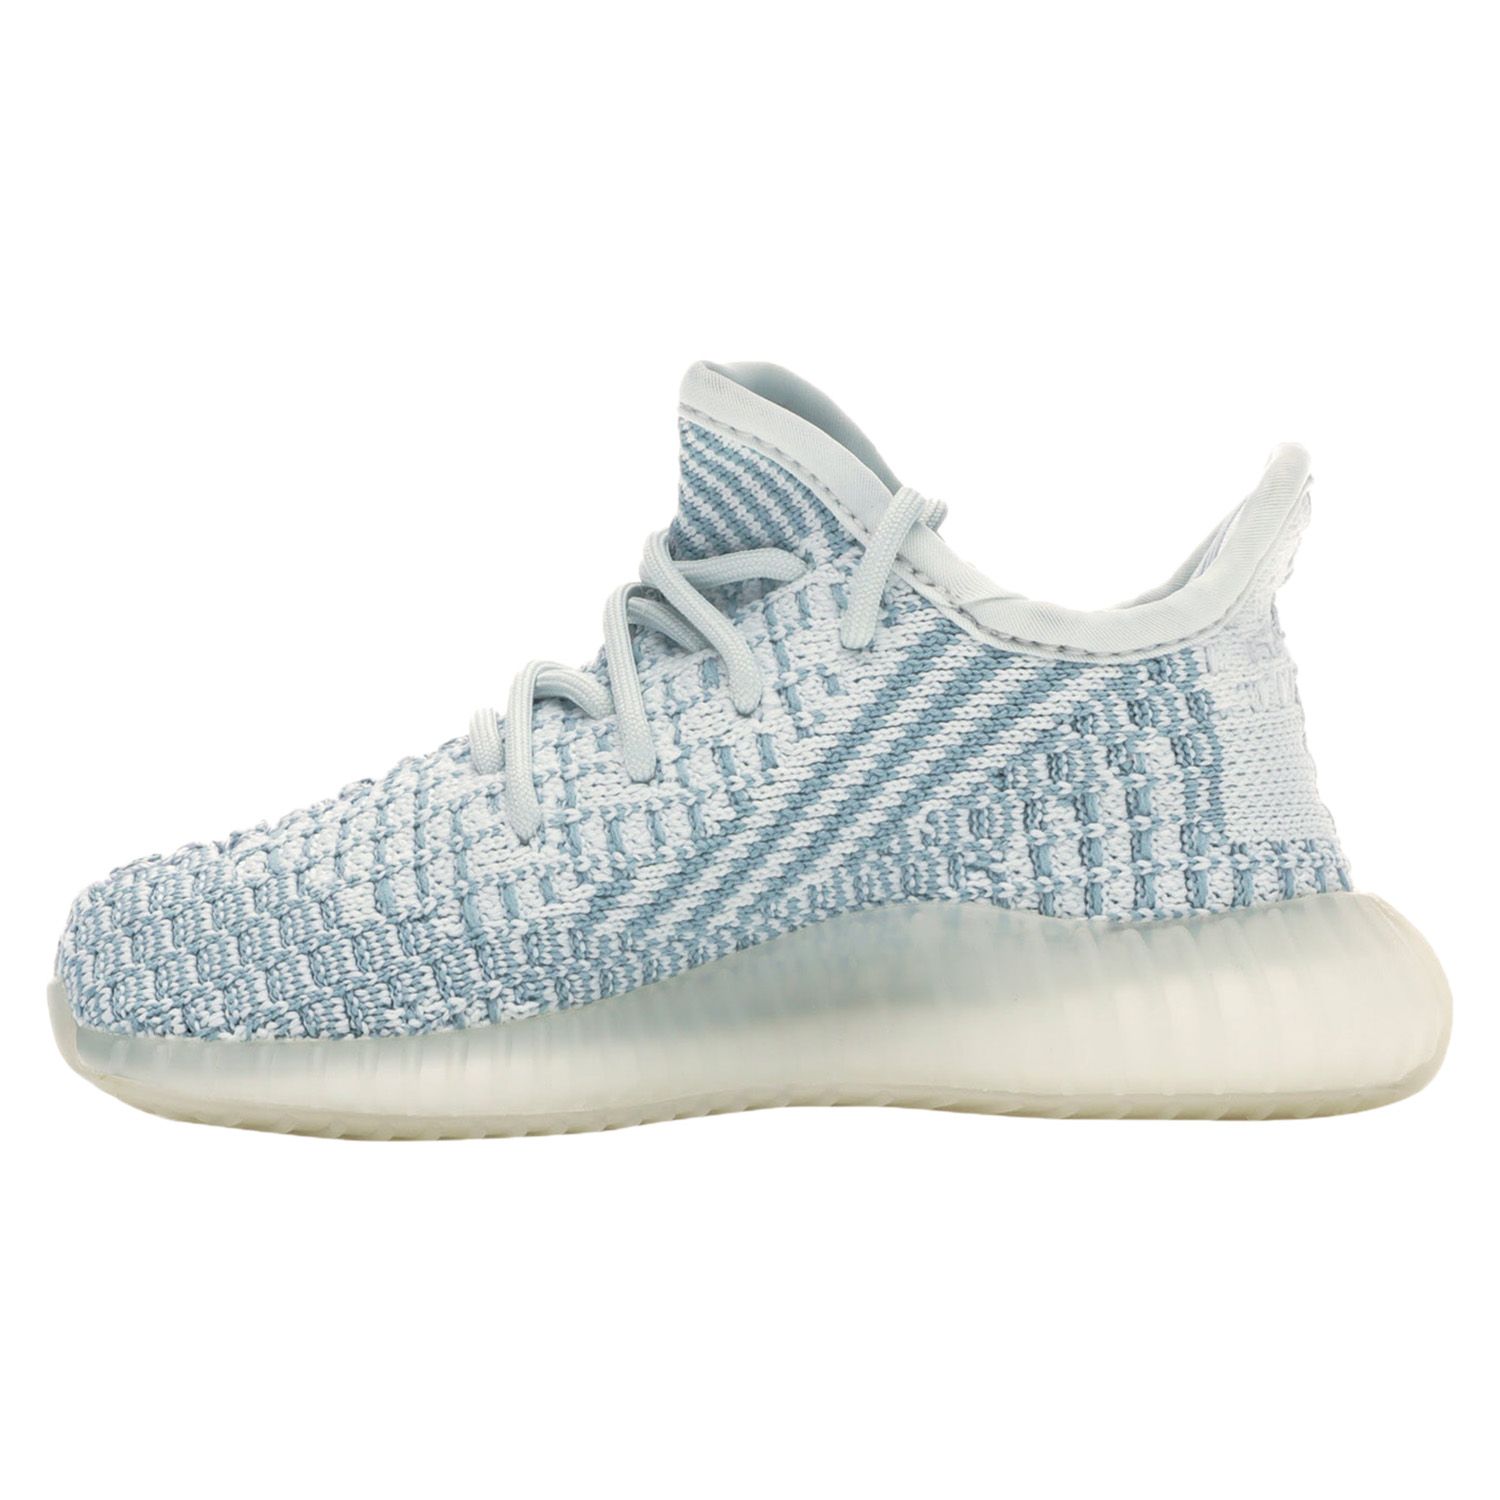 Adidas Yeezy Boost 350 V2 Toddlers 